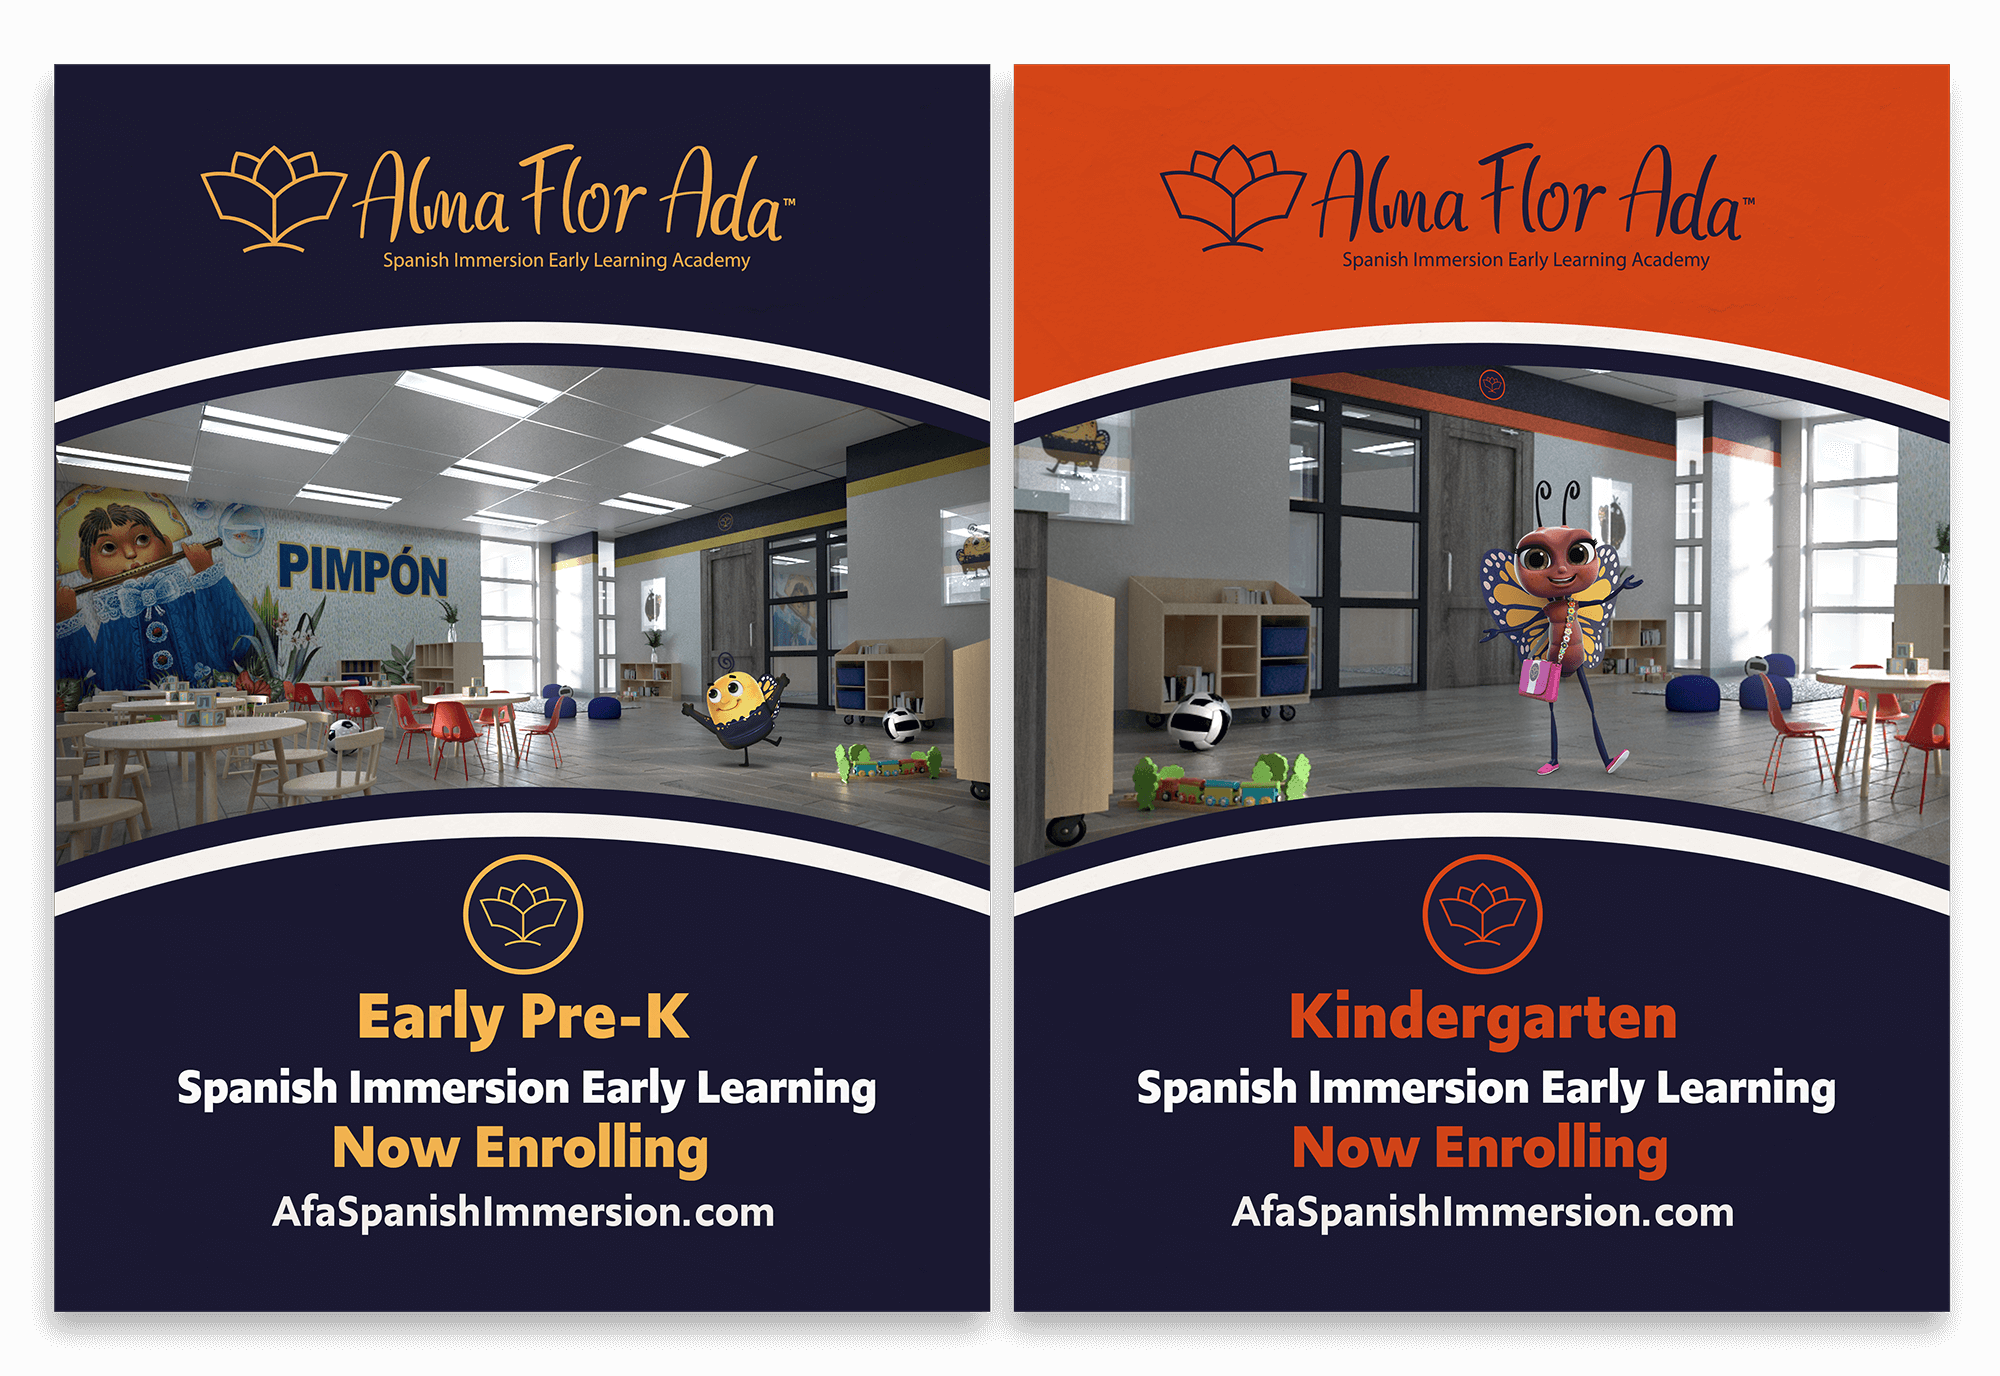 Alma Flor Ada Spanish Immersion Early Learning Academy